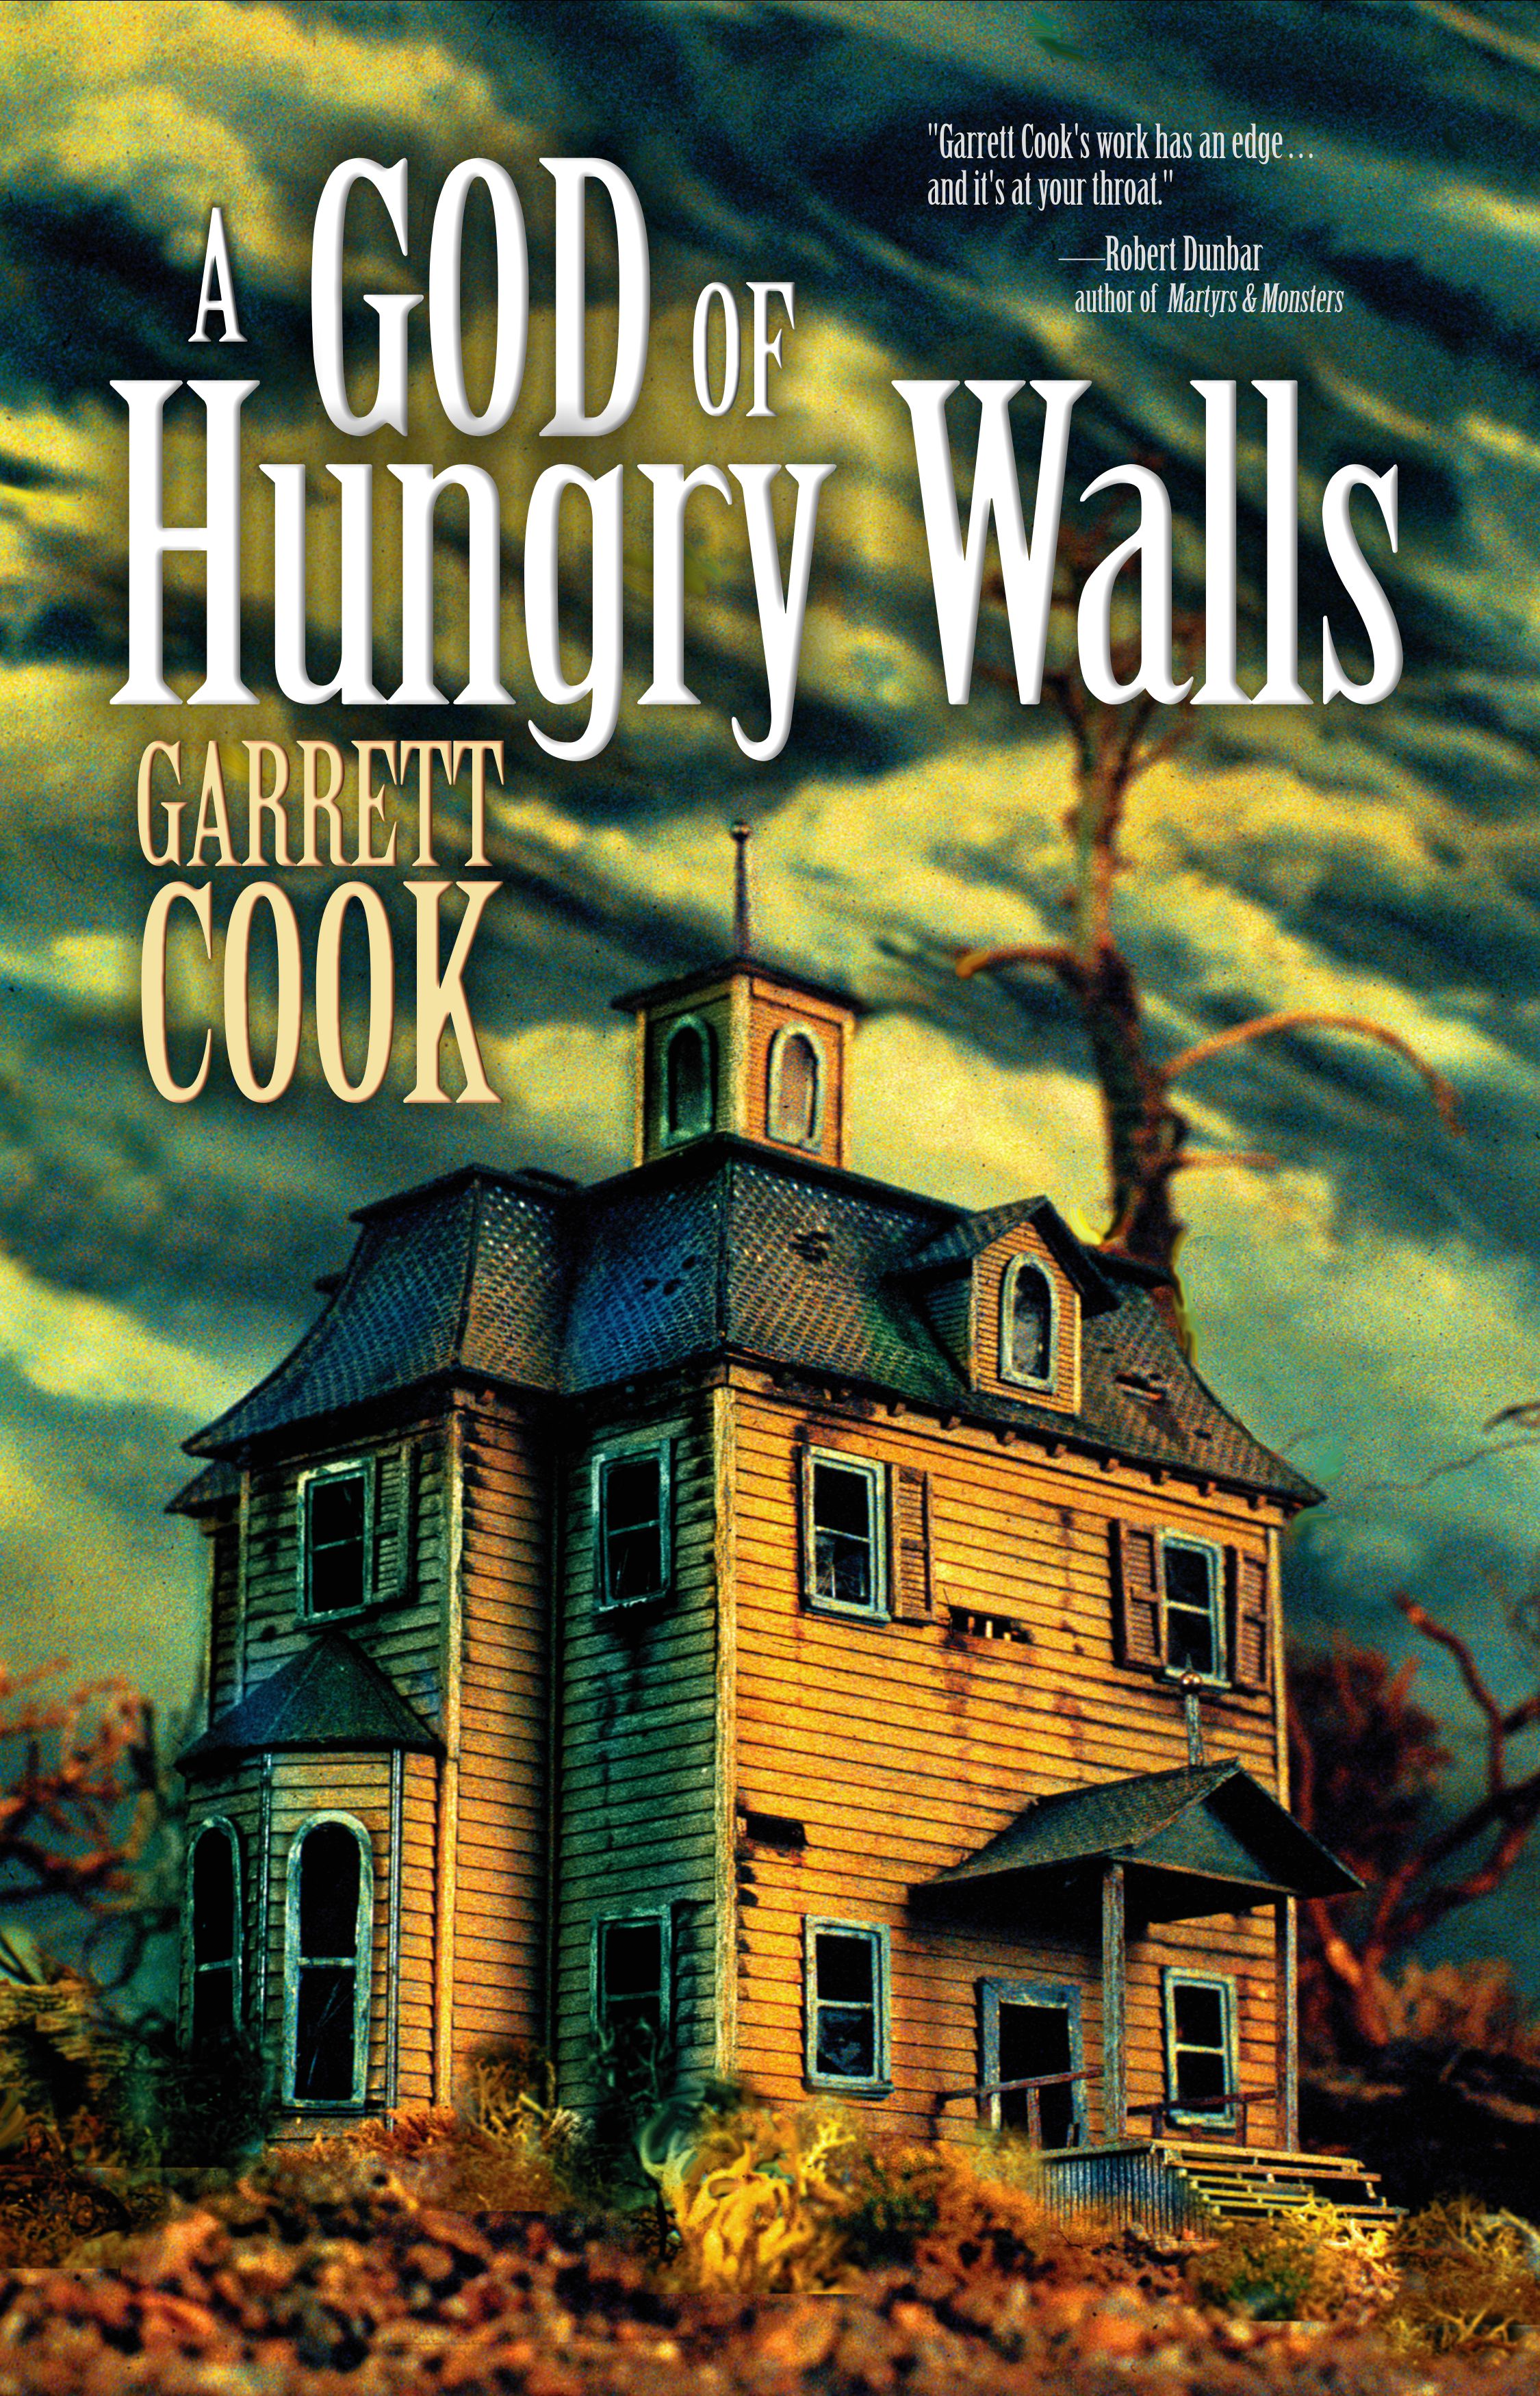 A God of Hungry Walls by Garrett Cook